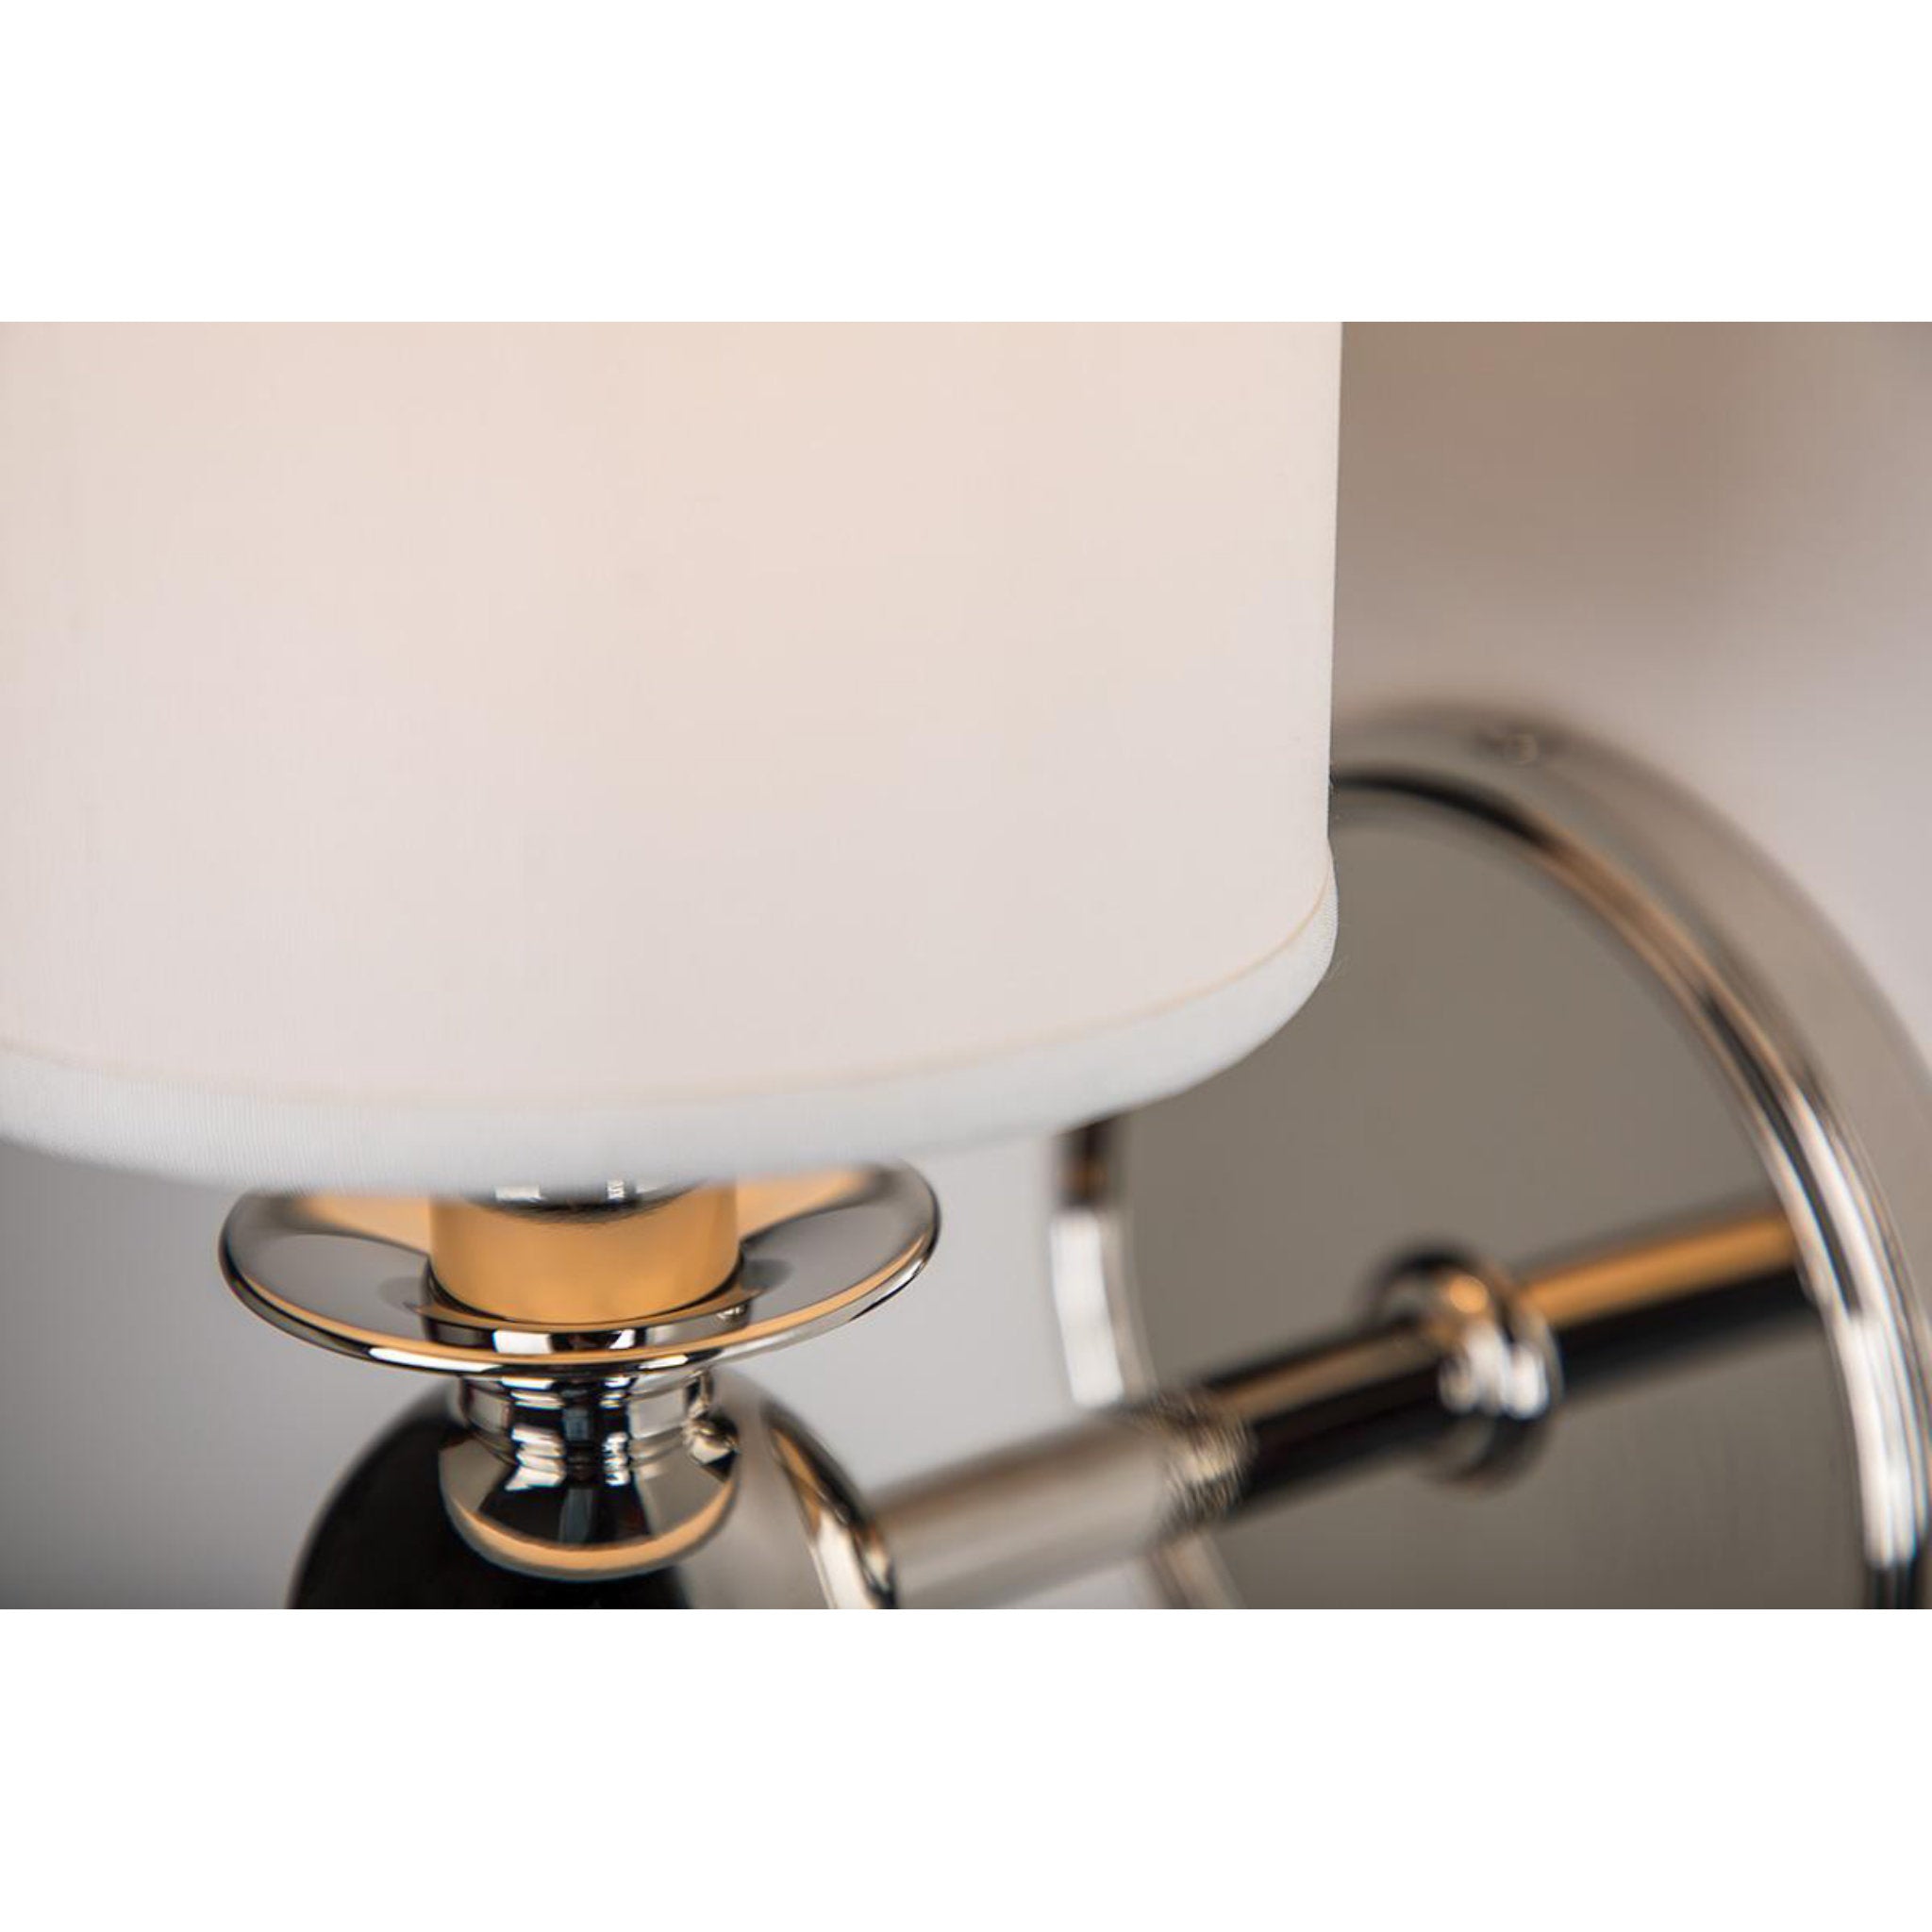 Gordon 1 Light Wall Sconce in Polished Nickel